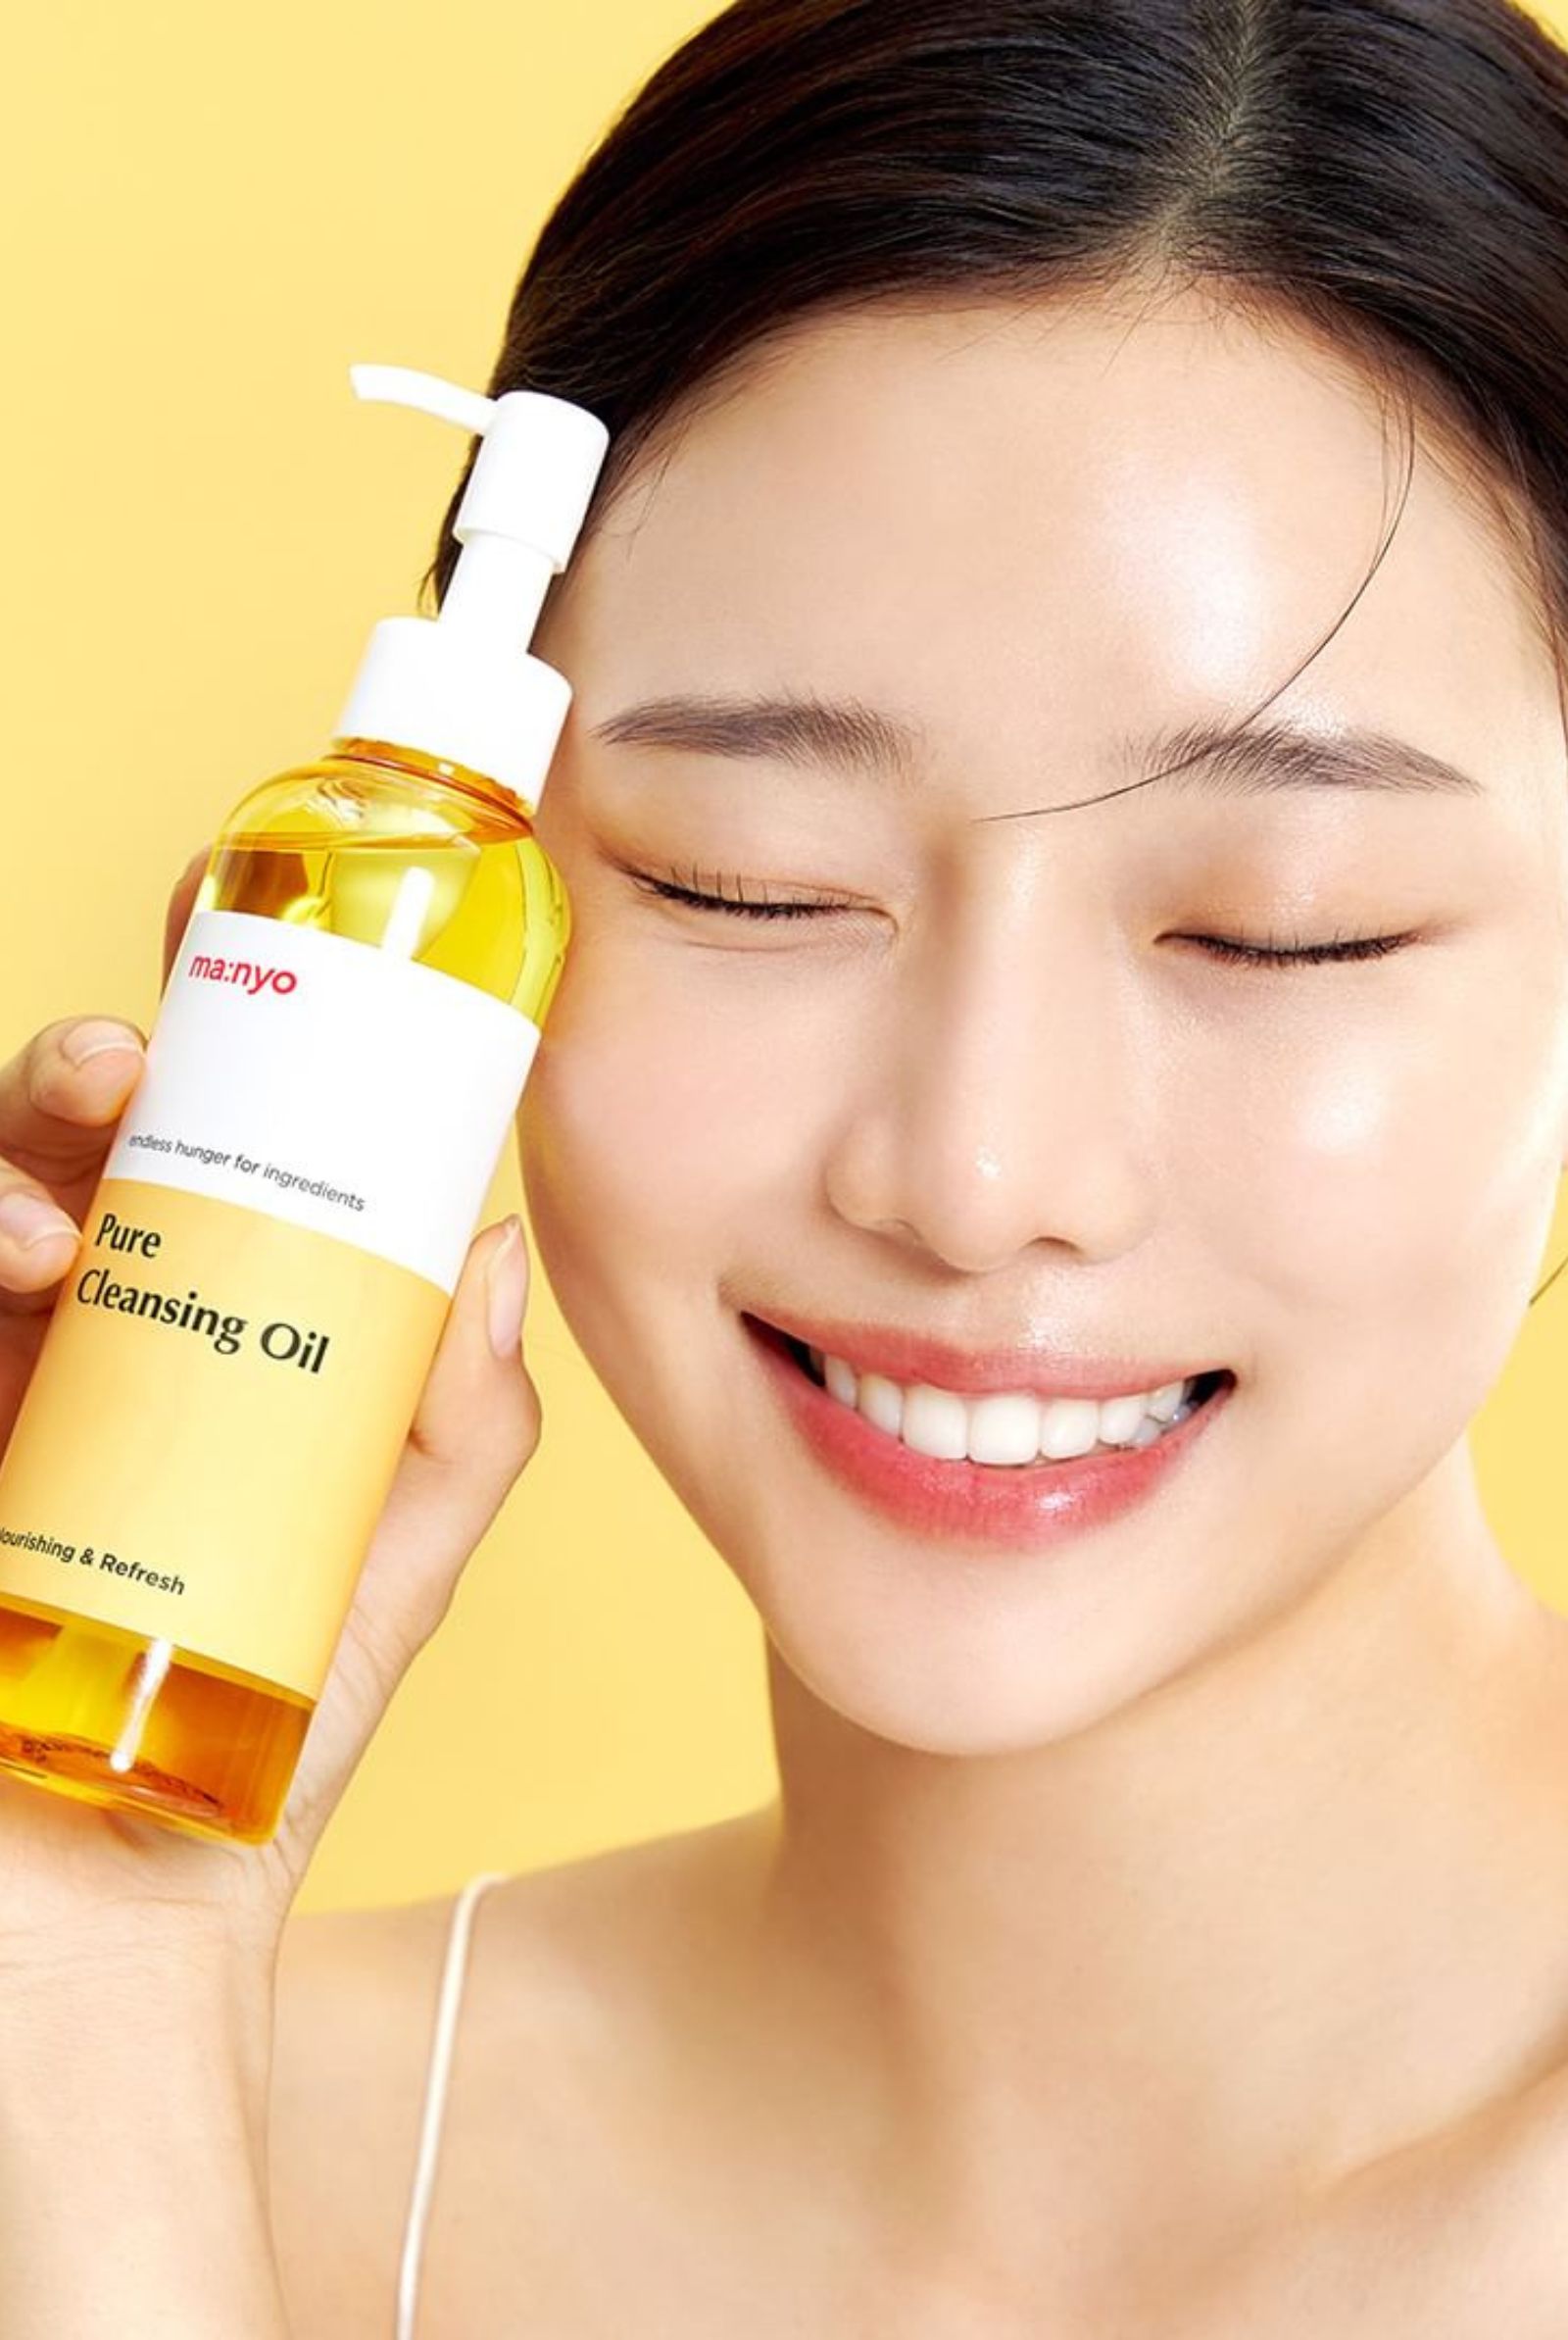 Manyo Pure Cleansing Oil 